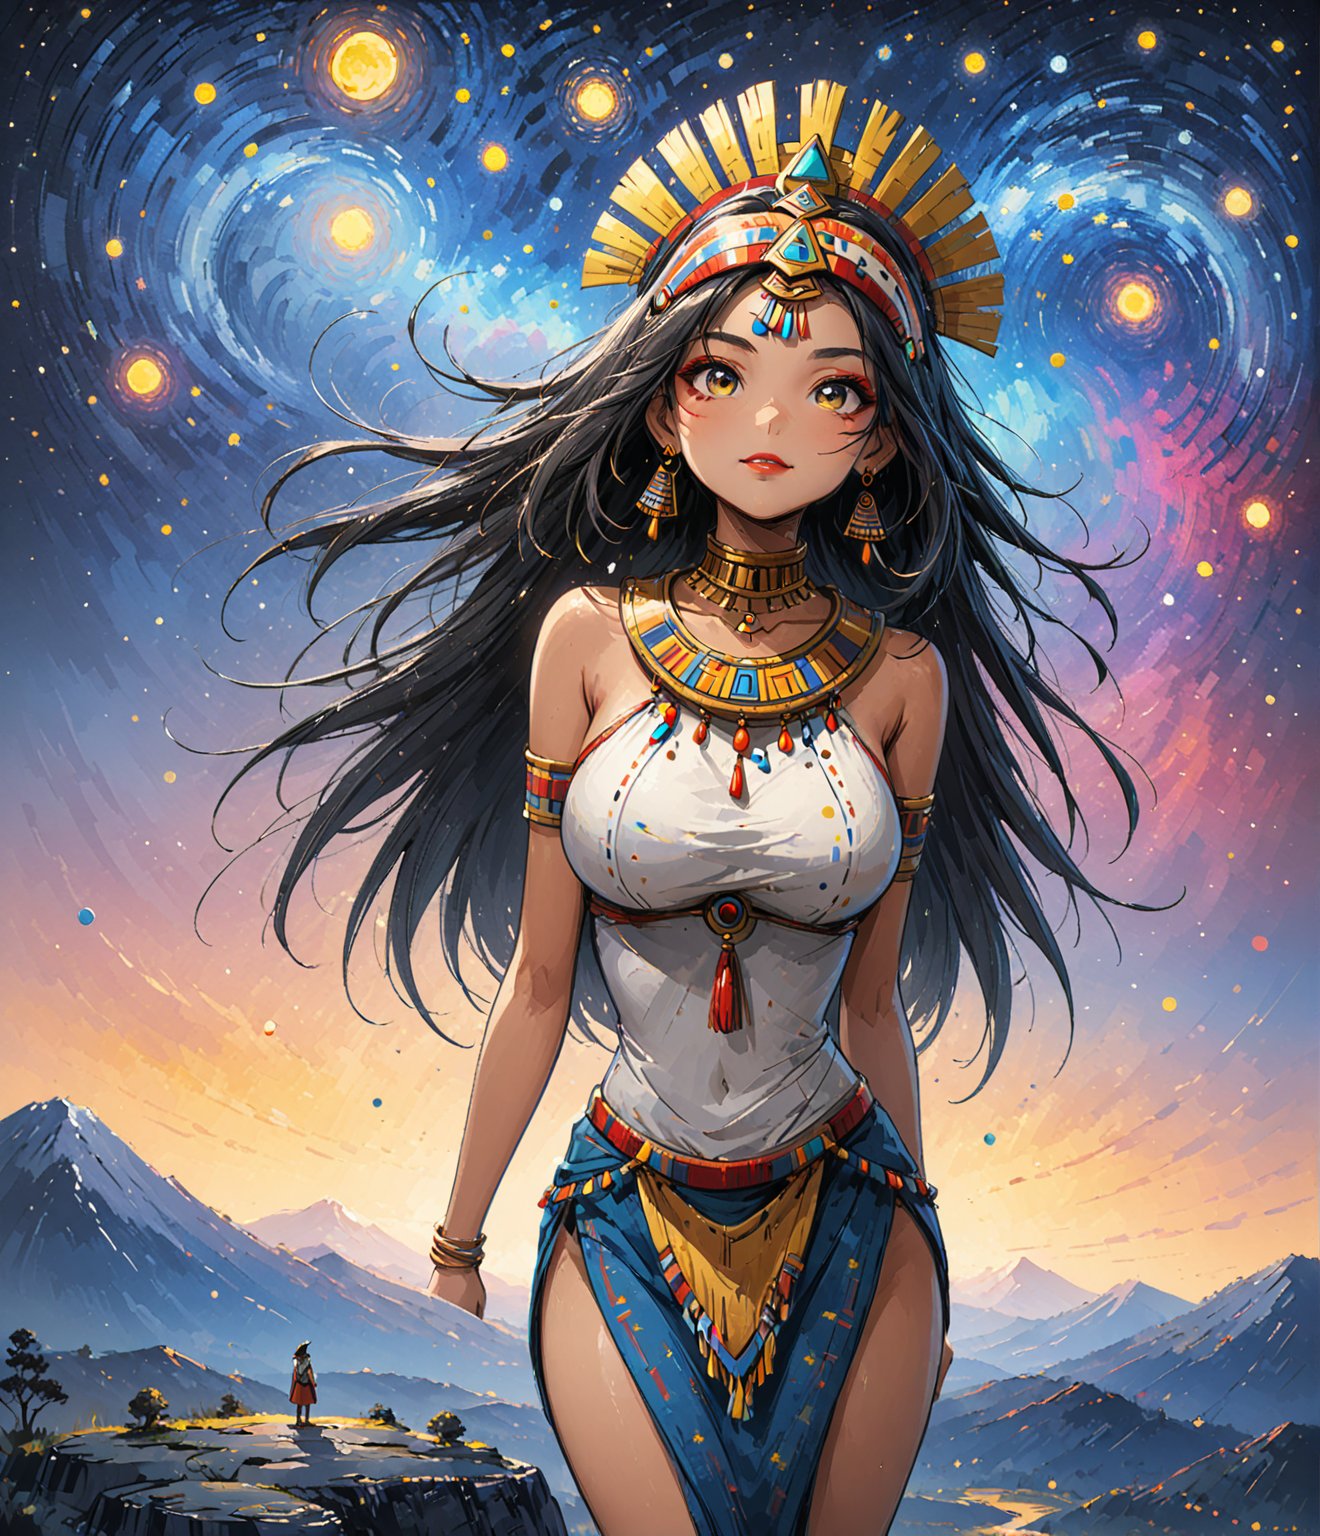 Masterpiece, 4K, ultra detailed, anime style, busty ancient Inca woman standing on mountain top, beautiful flawless face with great makeup, dangling earrings, colorful headpiece, epic starry night, windy, more detail XL, SFW, depth of field, (ukiyoe art style), 